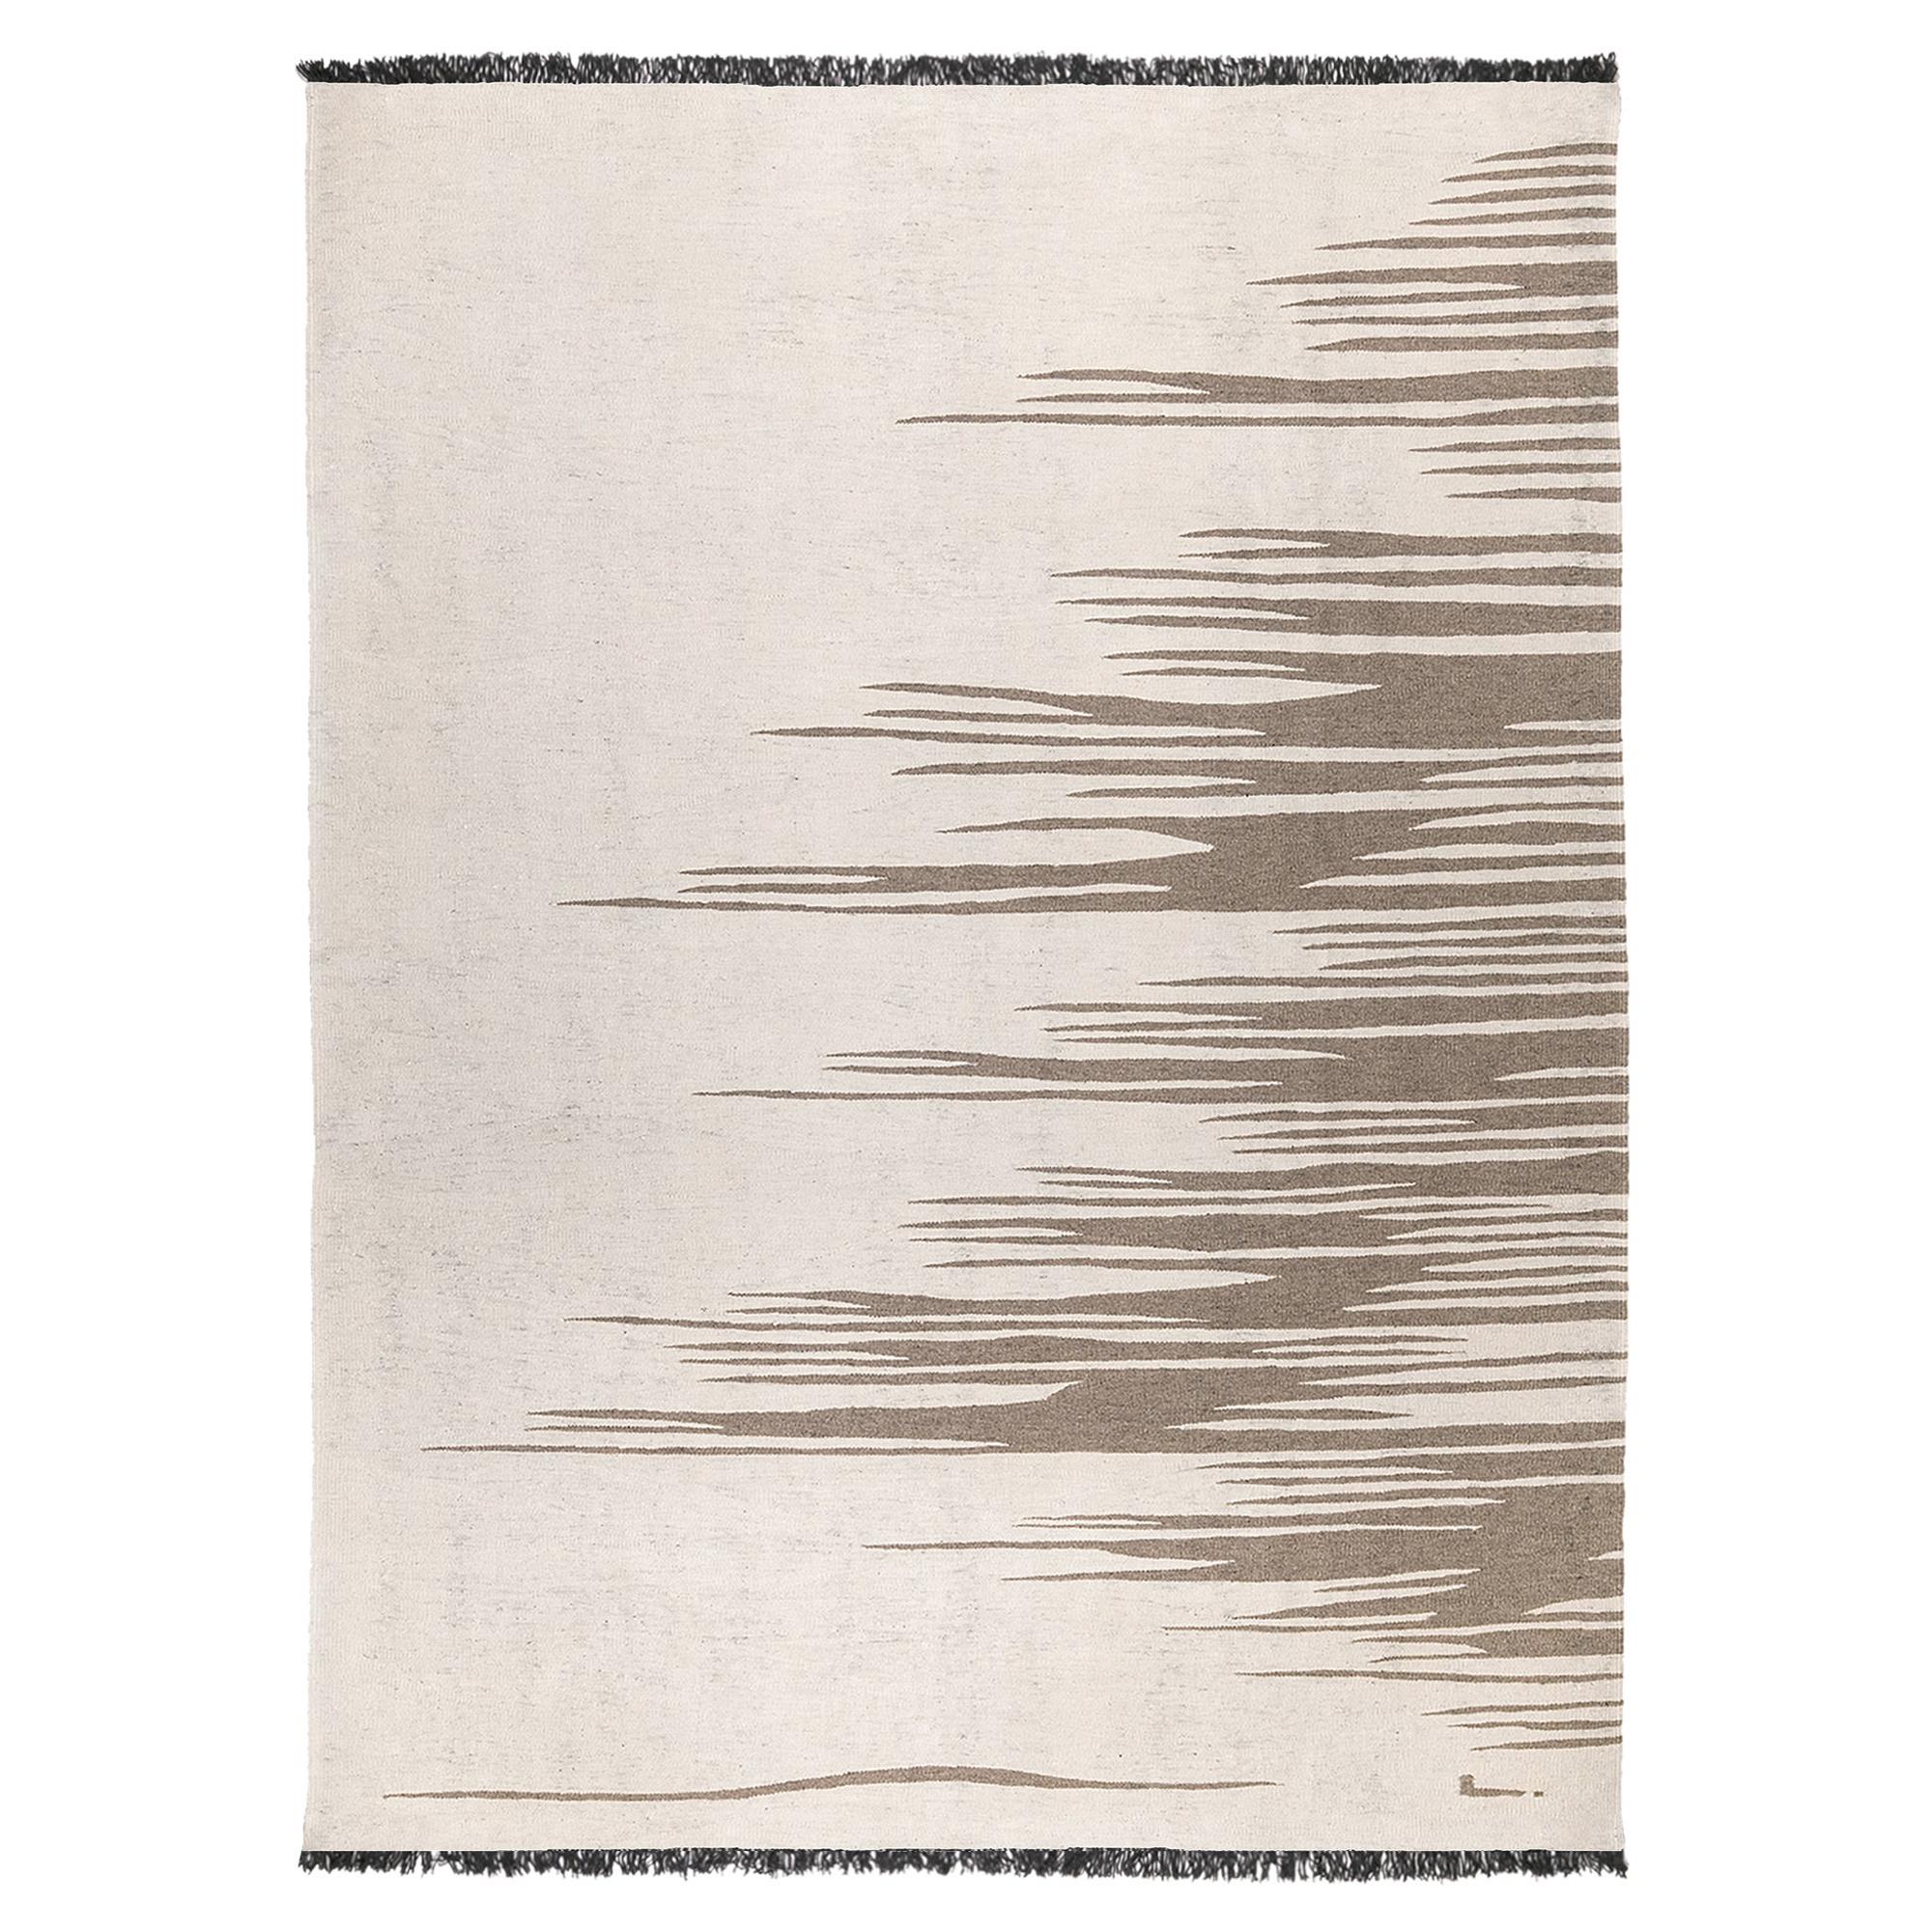 Ege No 3 Contemporary Kilim Rug Wool Handwoven Dune White and Earthy Gray